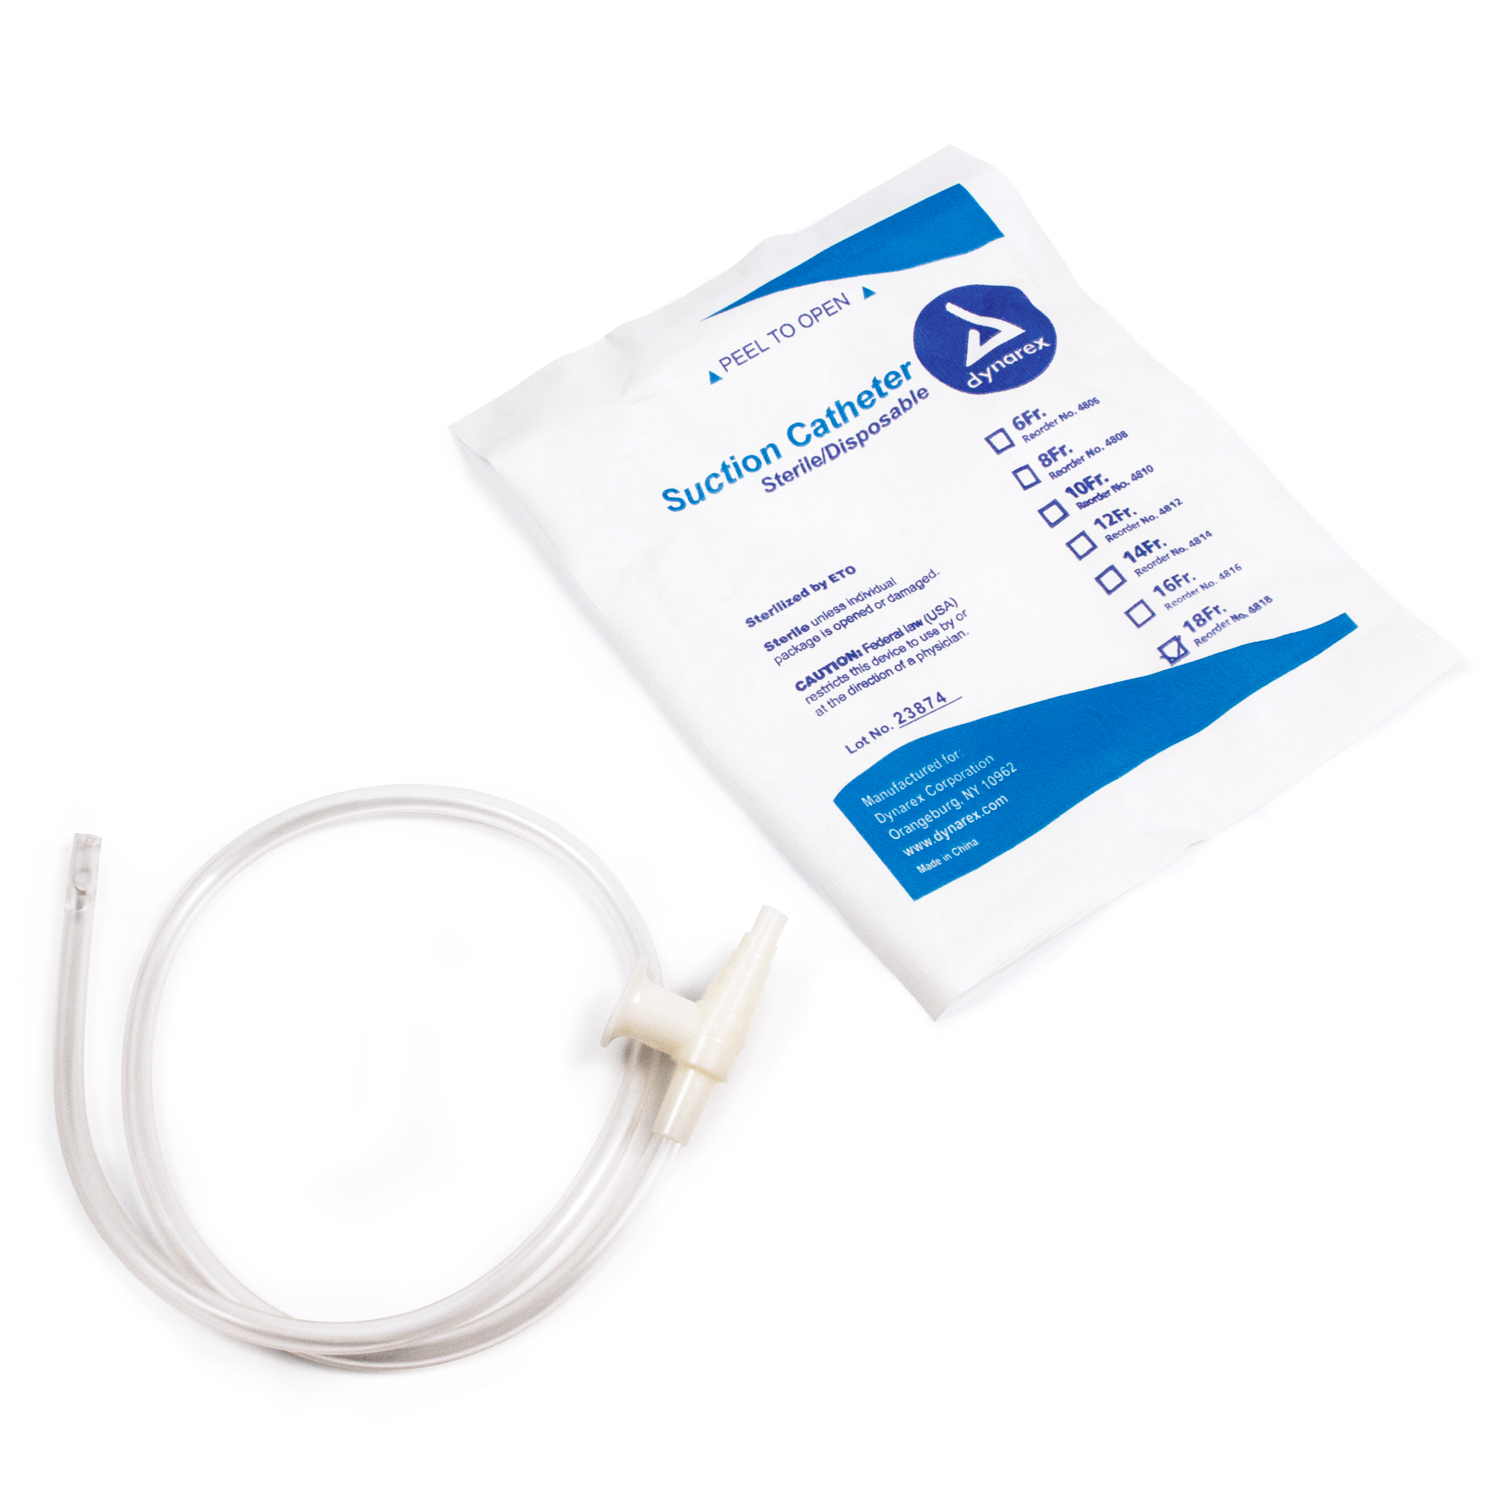 Suction Catheters Sterile - 18 Fr